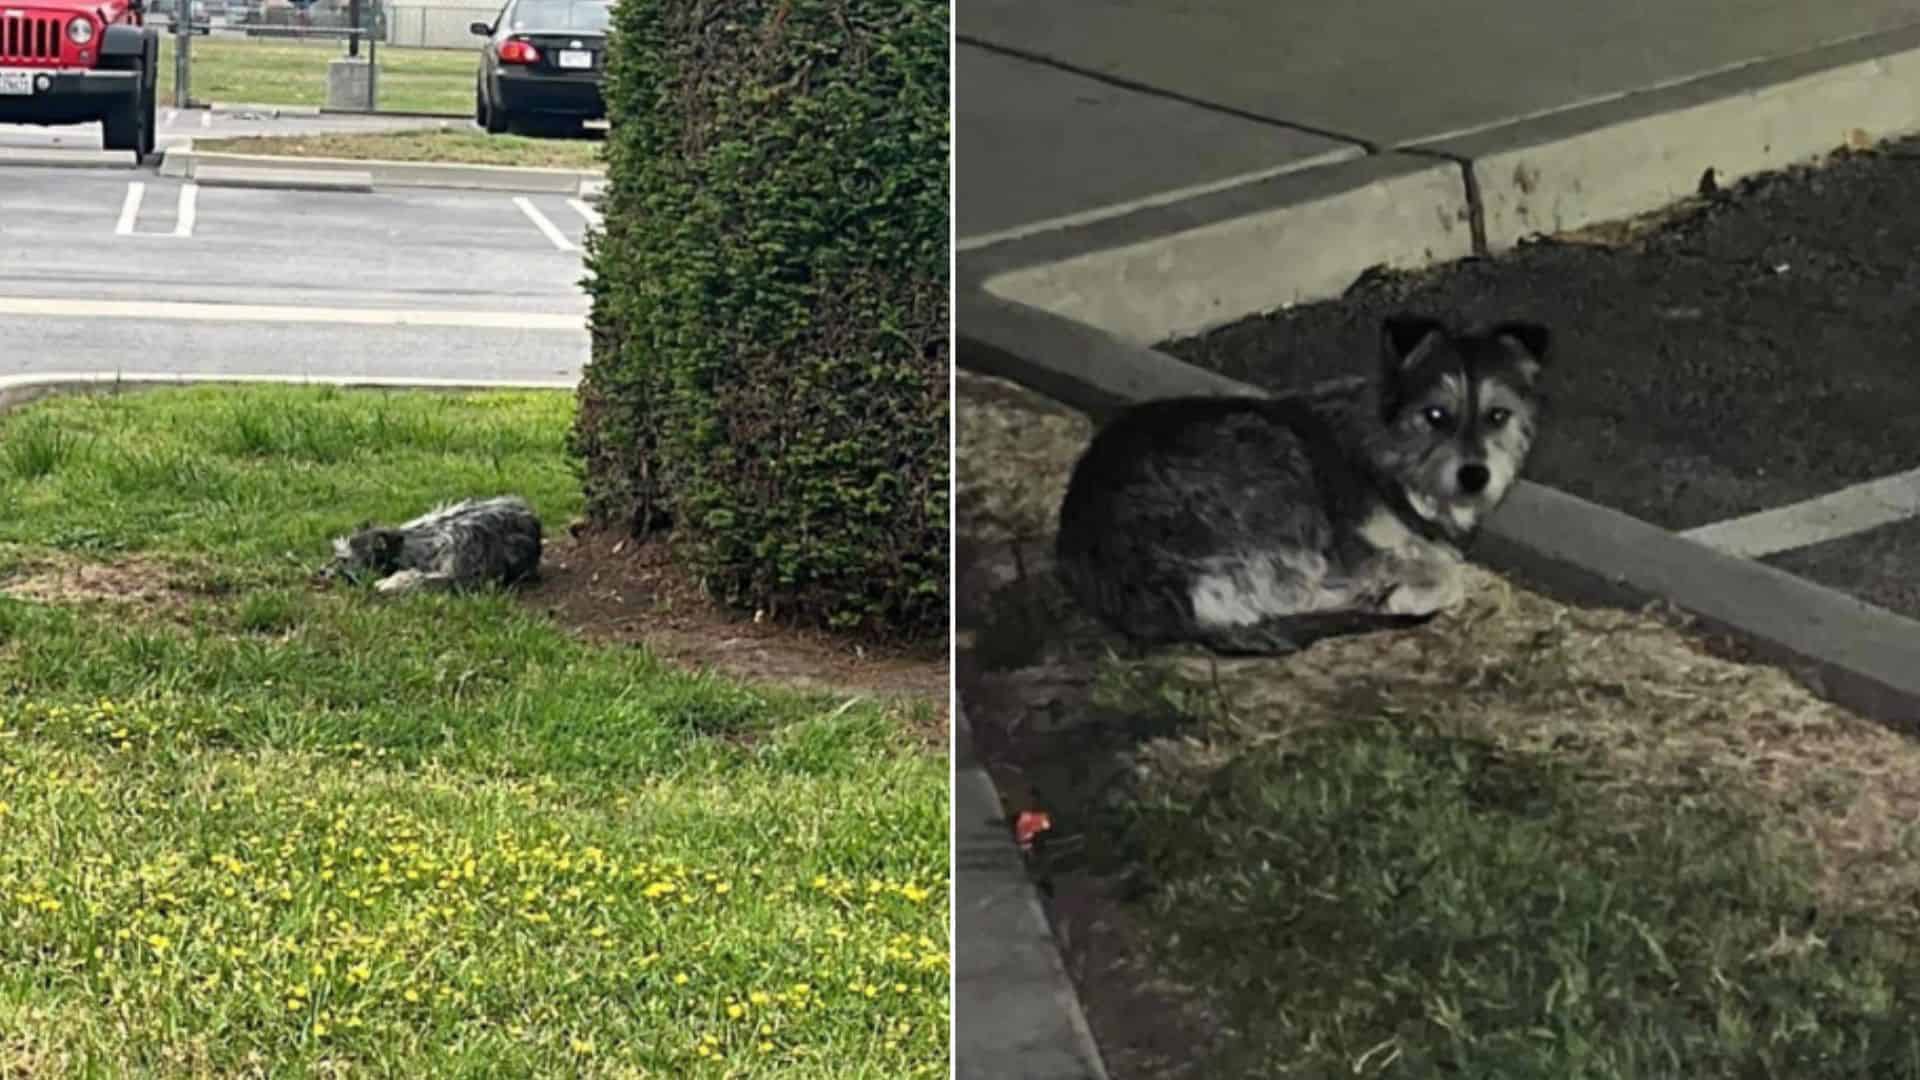 Dog Abandoned At A Parking Lot Spends Weeks There Waiting For Her Family